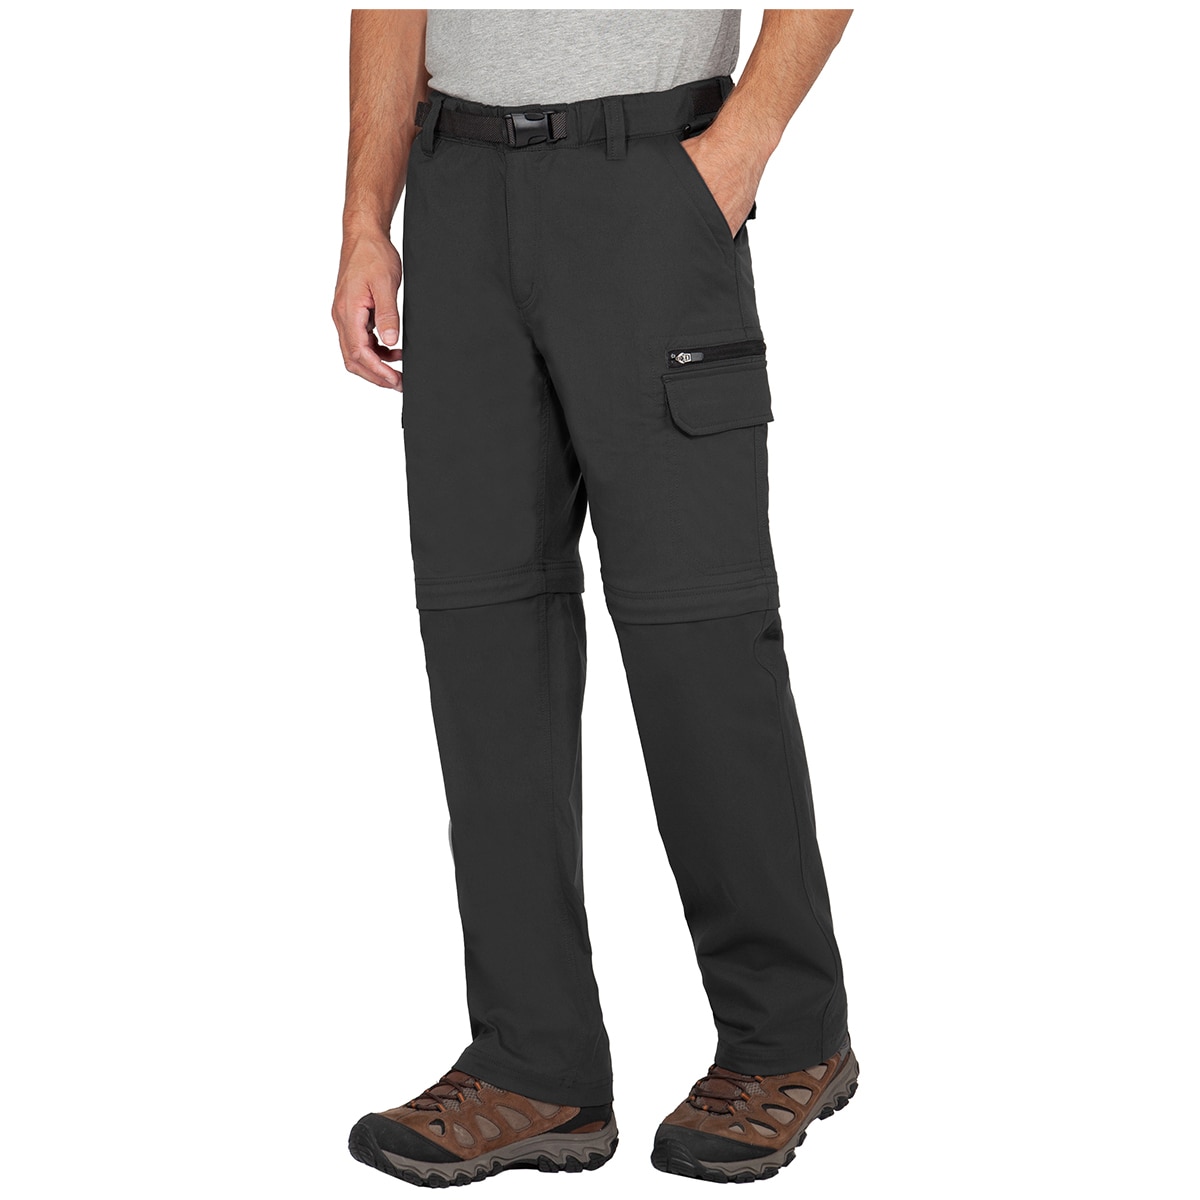 Ridgepoint Pant Covertable Pants - Charcoal